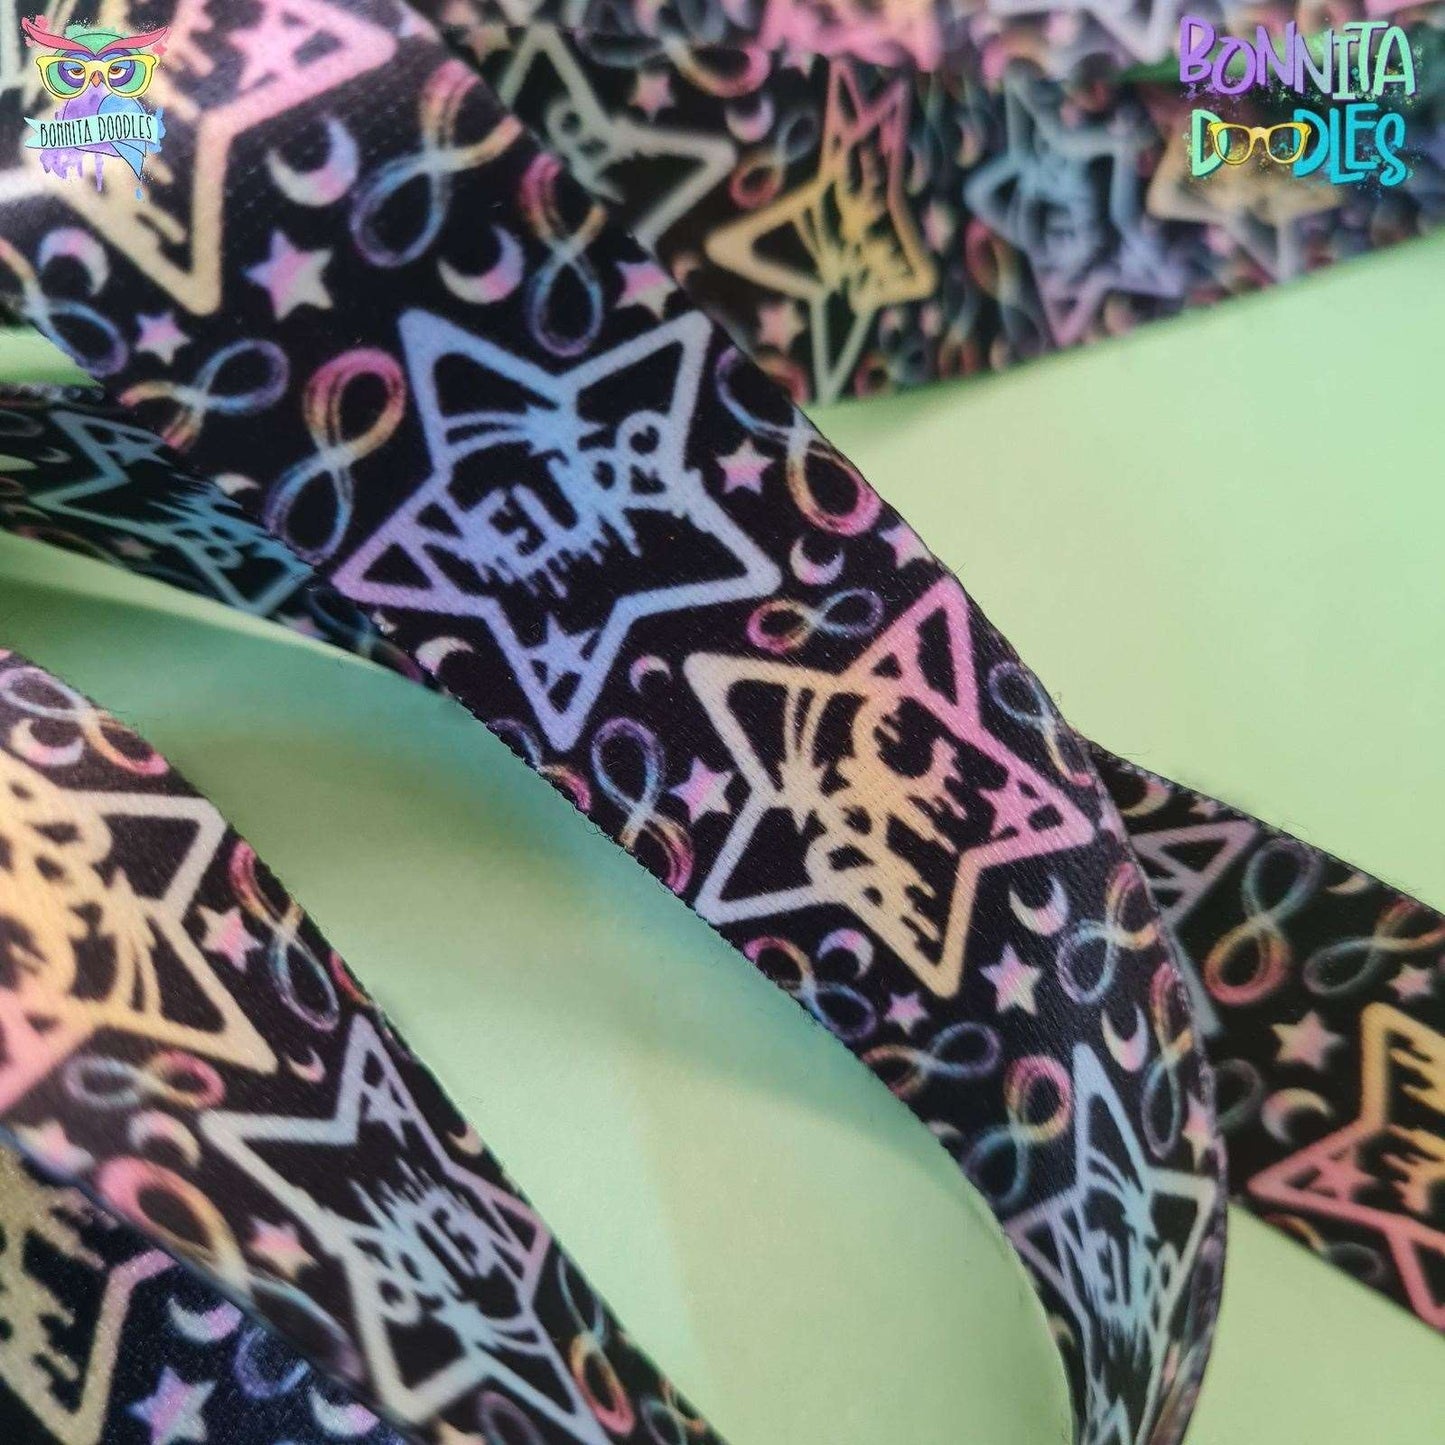 Neurospicy stars - Lanyard - soft and perfect for sensory accommodation.